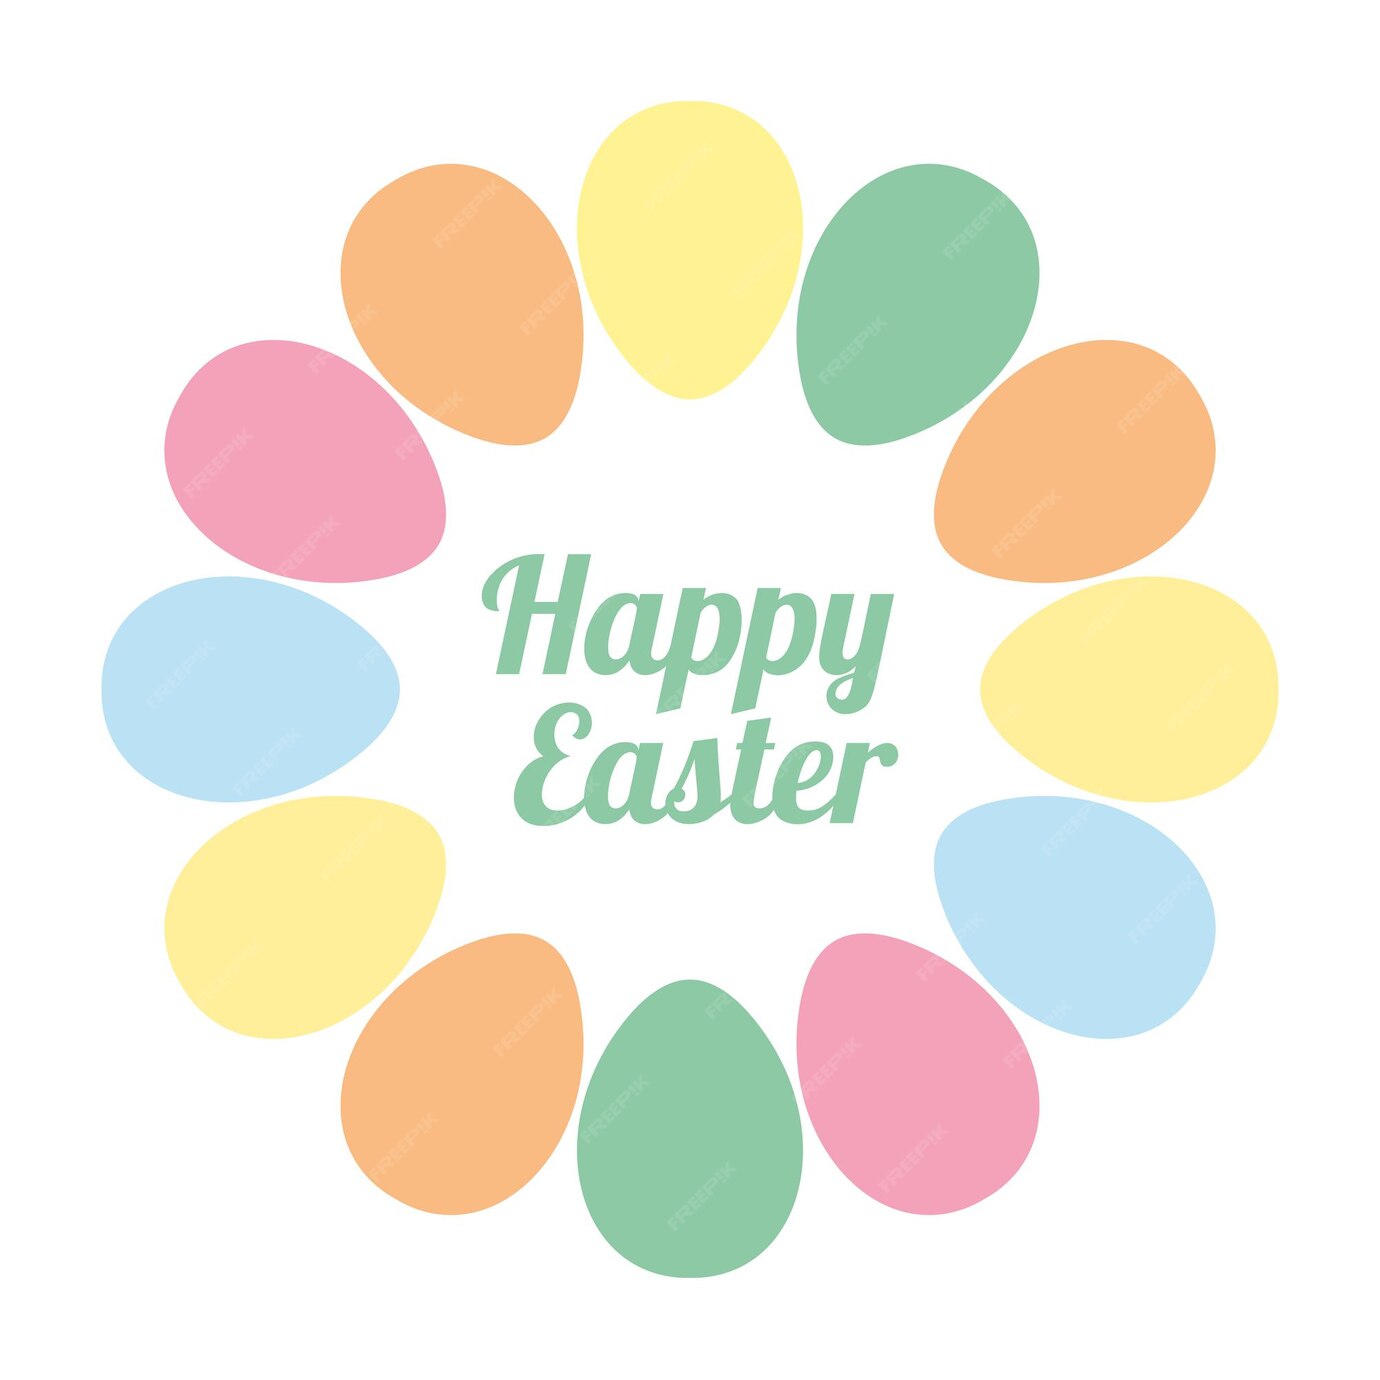 Premium Vector | Colorful happy easter eggs round frame on light ...